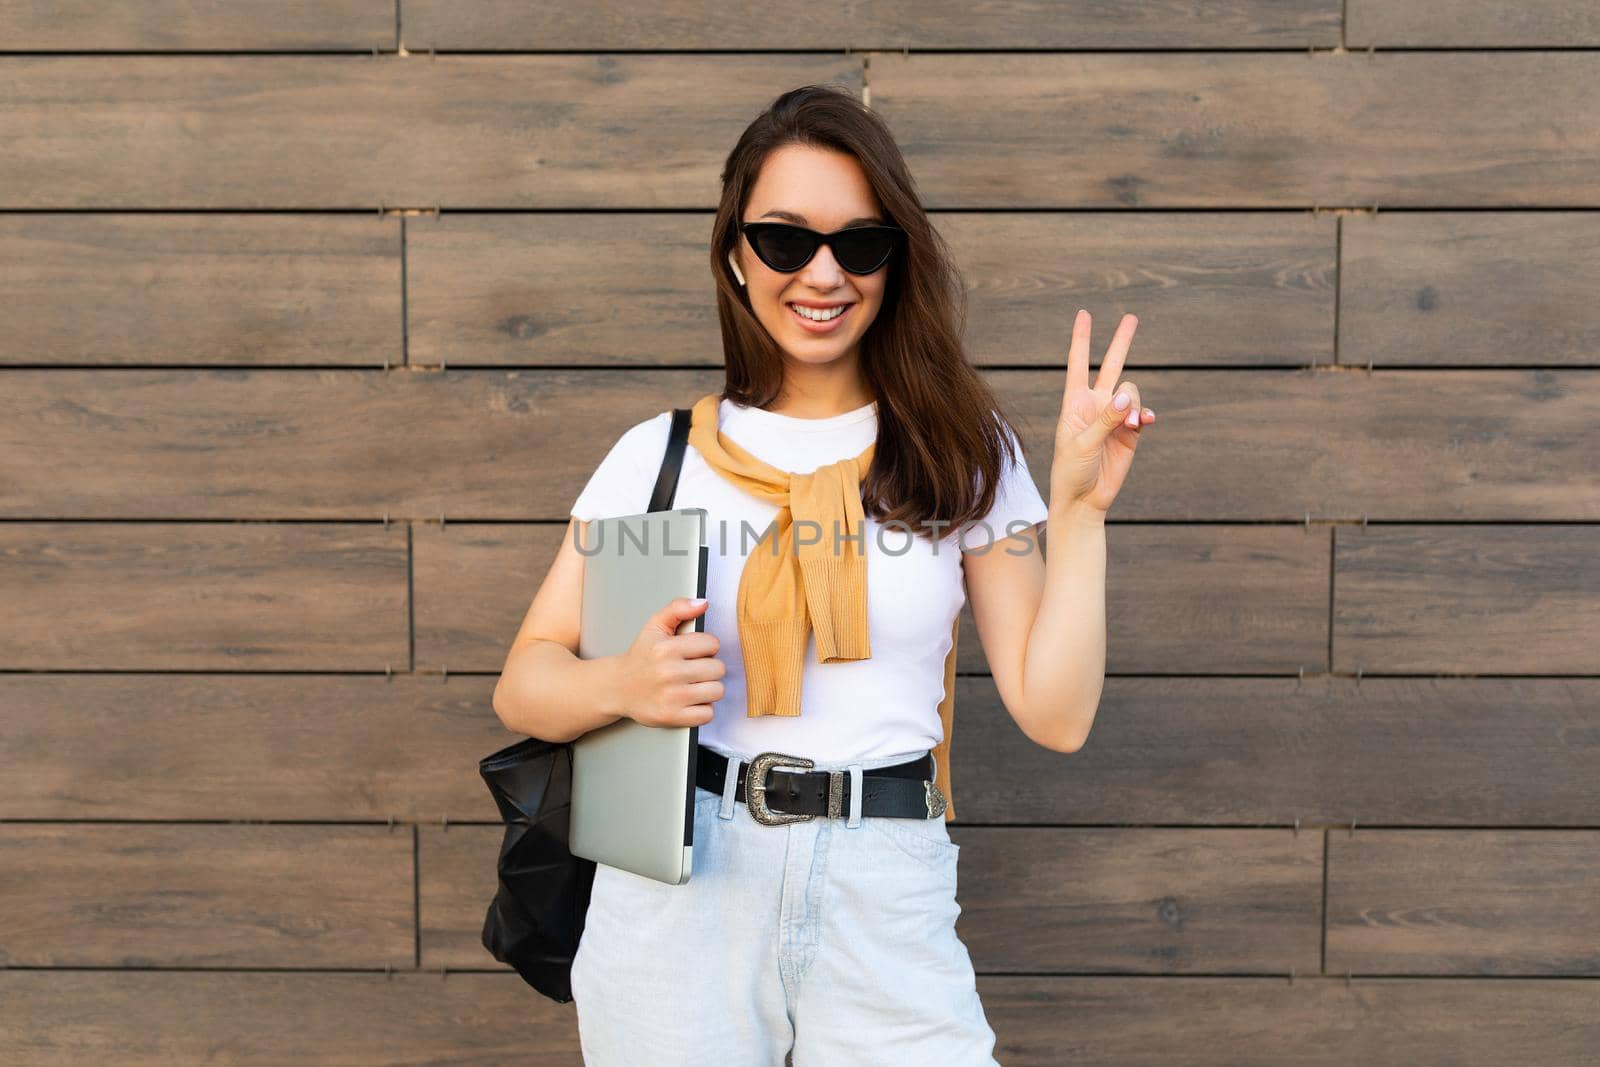 Beautiful smiling charming young brunet woman looking at camera holding computer laptop and sunglasses showing peace gesture in white t-shirt and light blue jeans in the street.